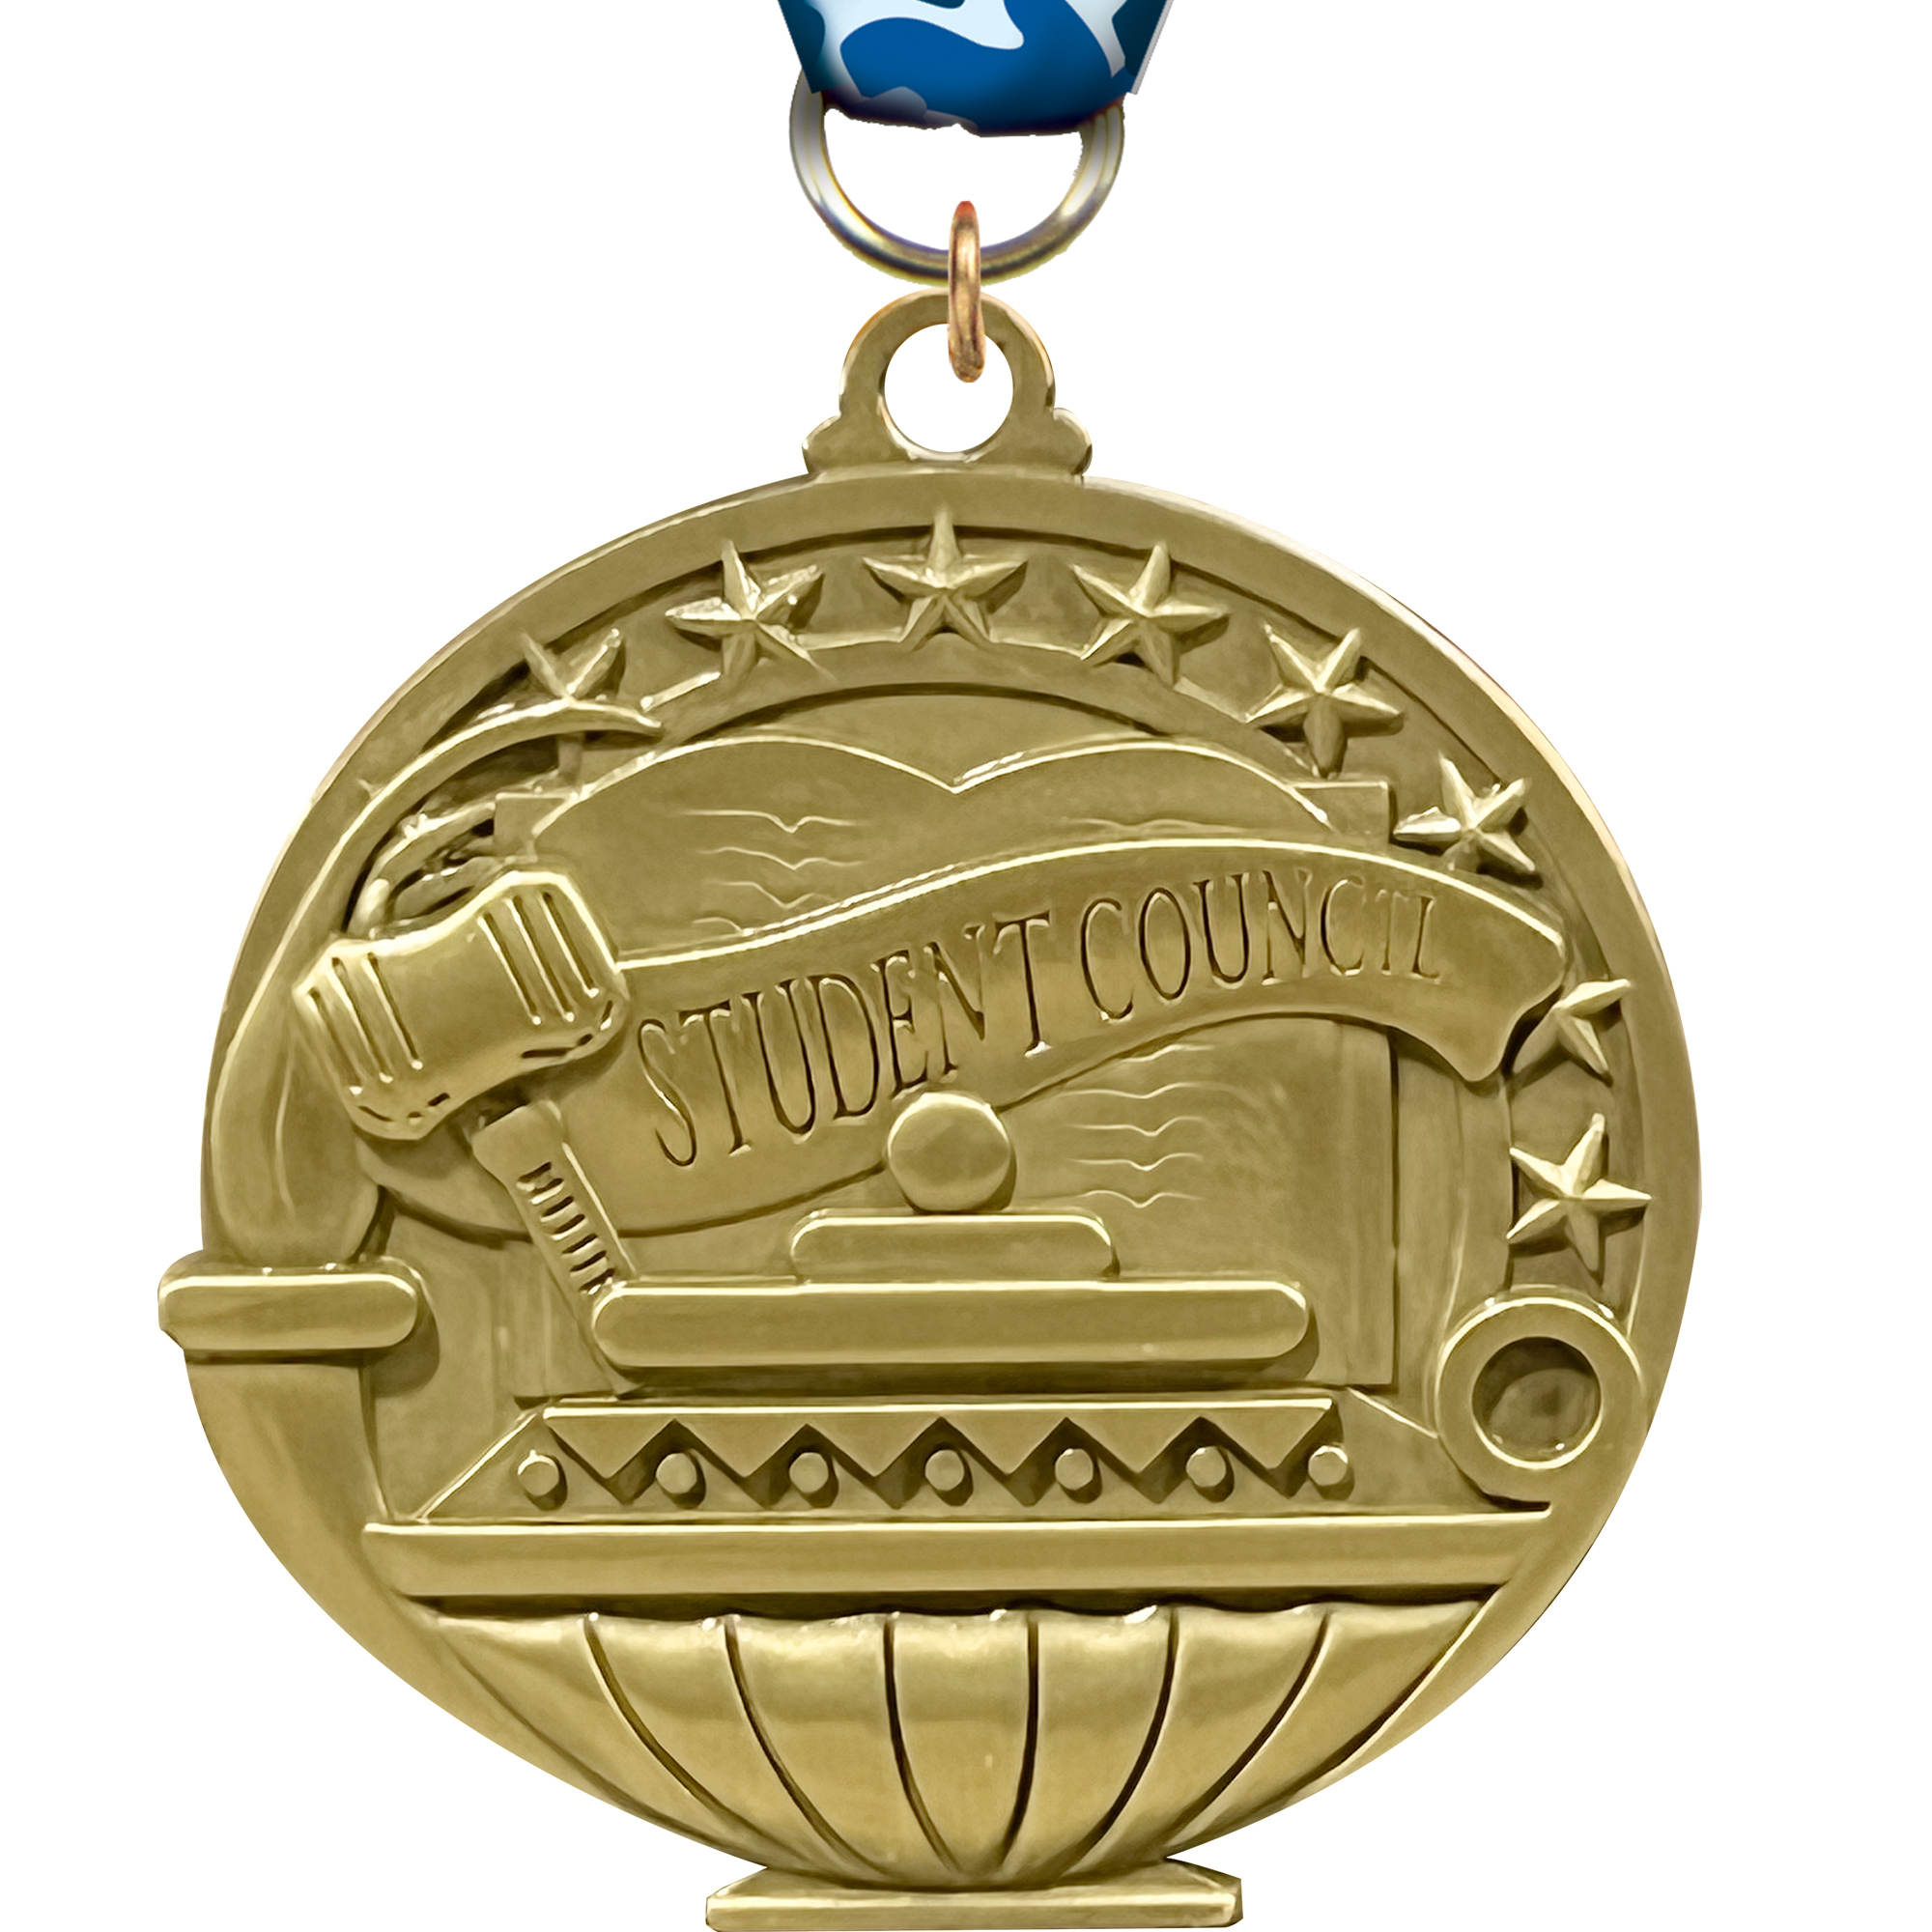 Student Council Academic Medal